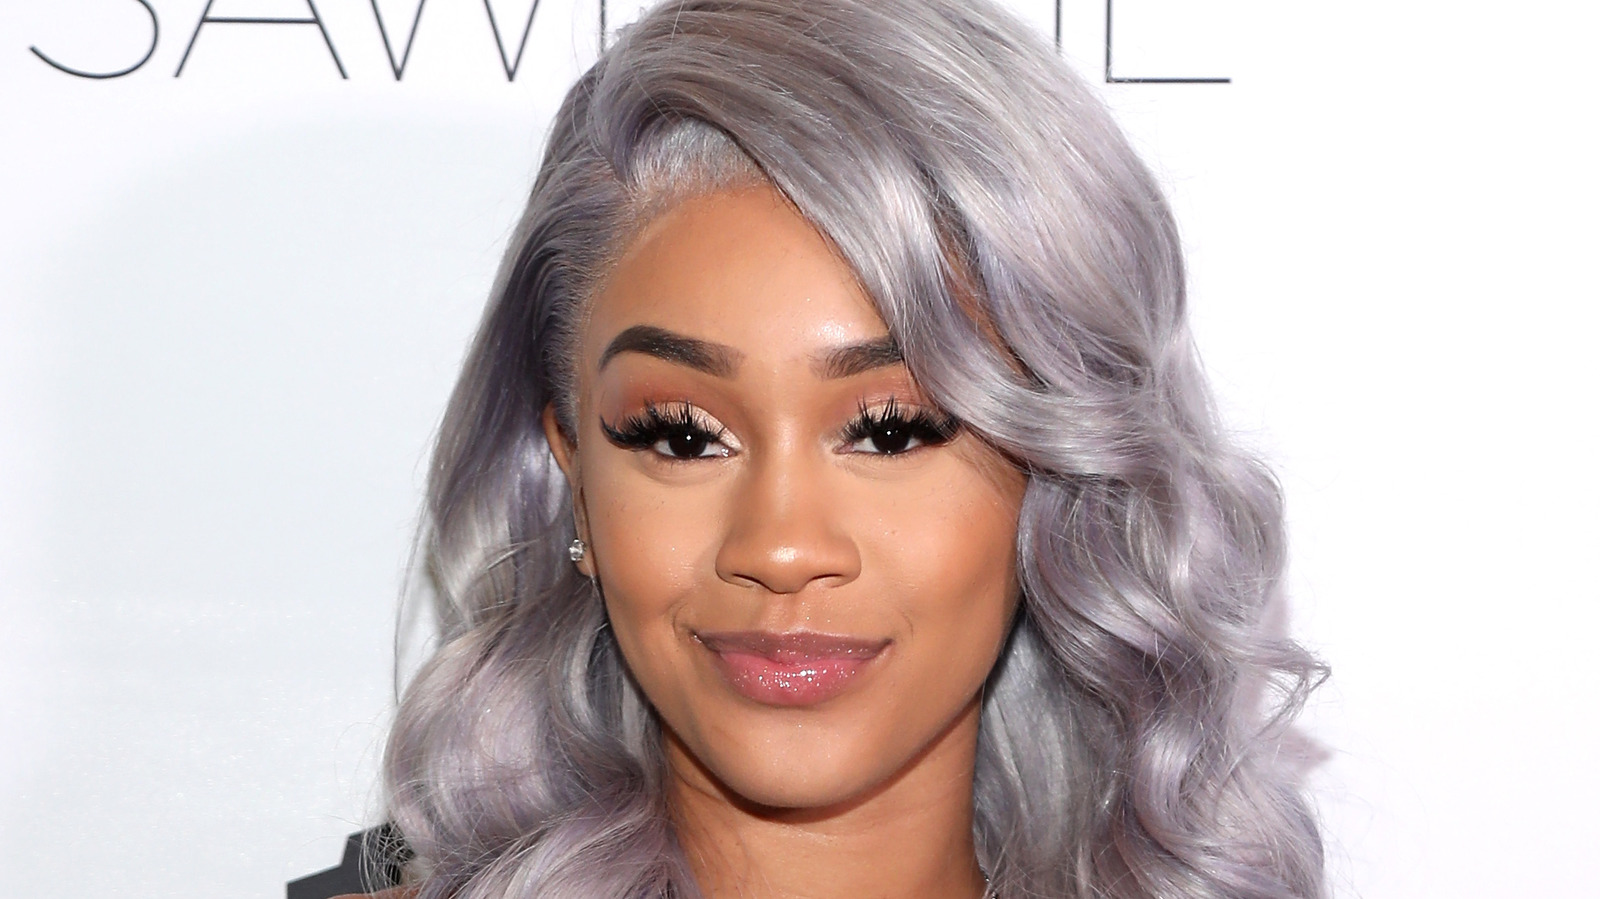 Saweetie shares her own opinion on Carole Baskin